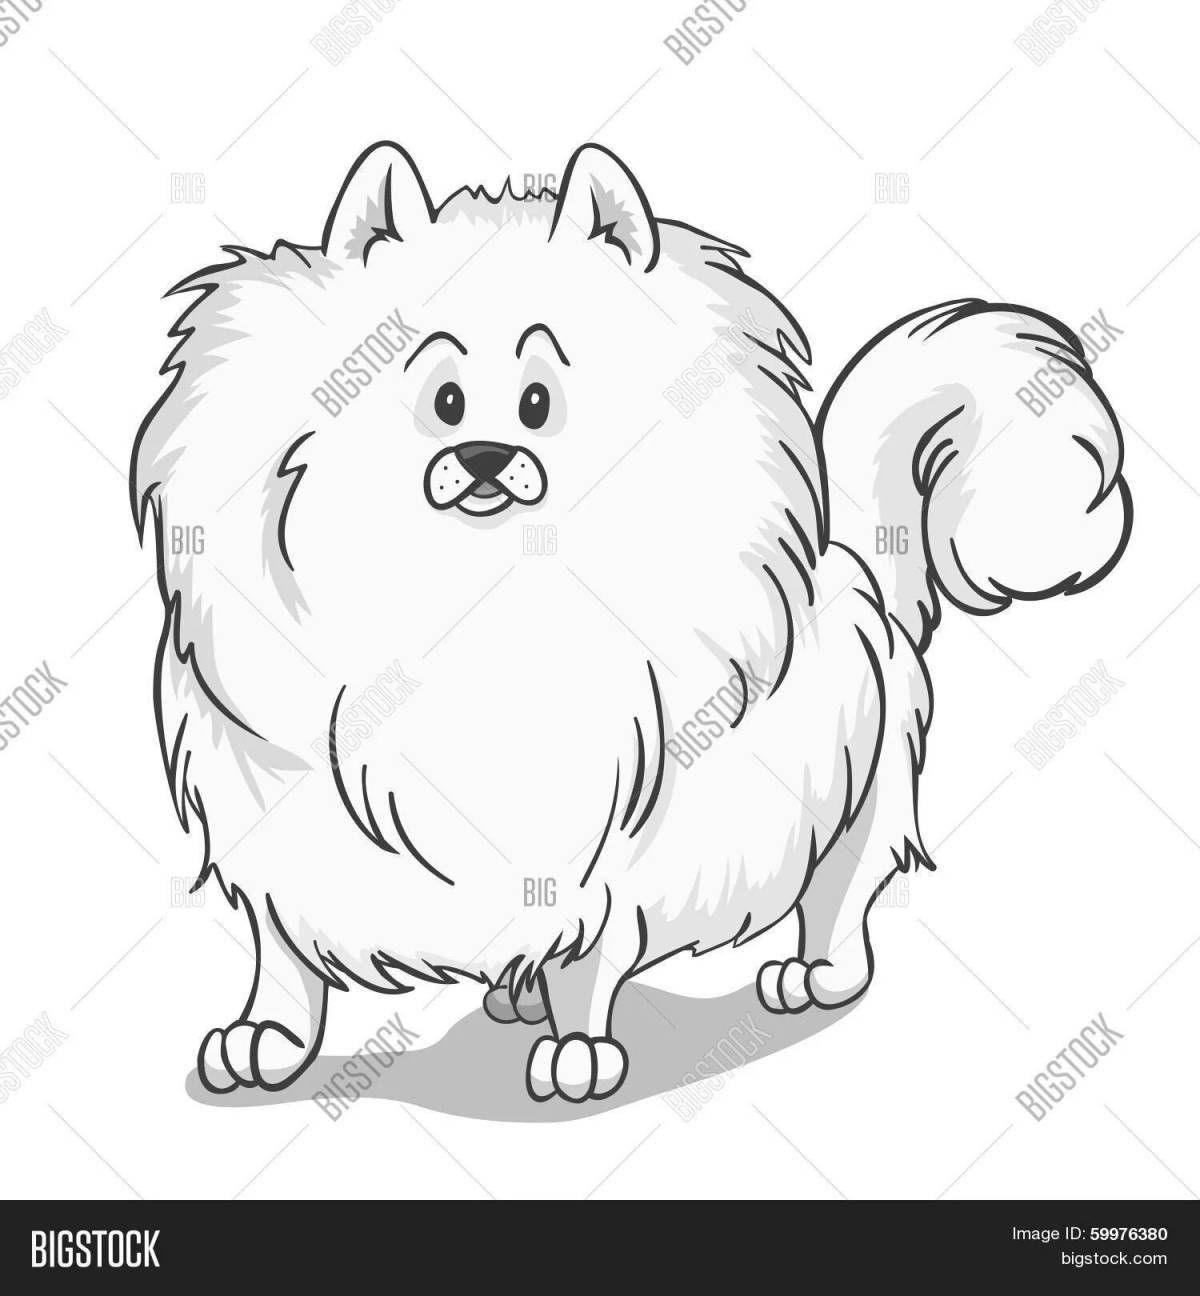 Impressive drawing of a spitz